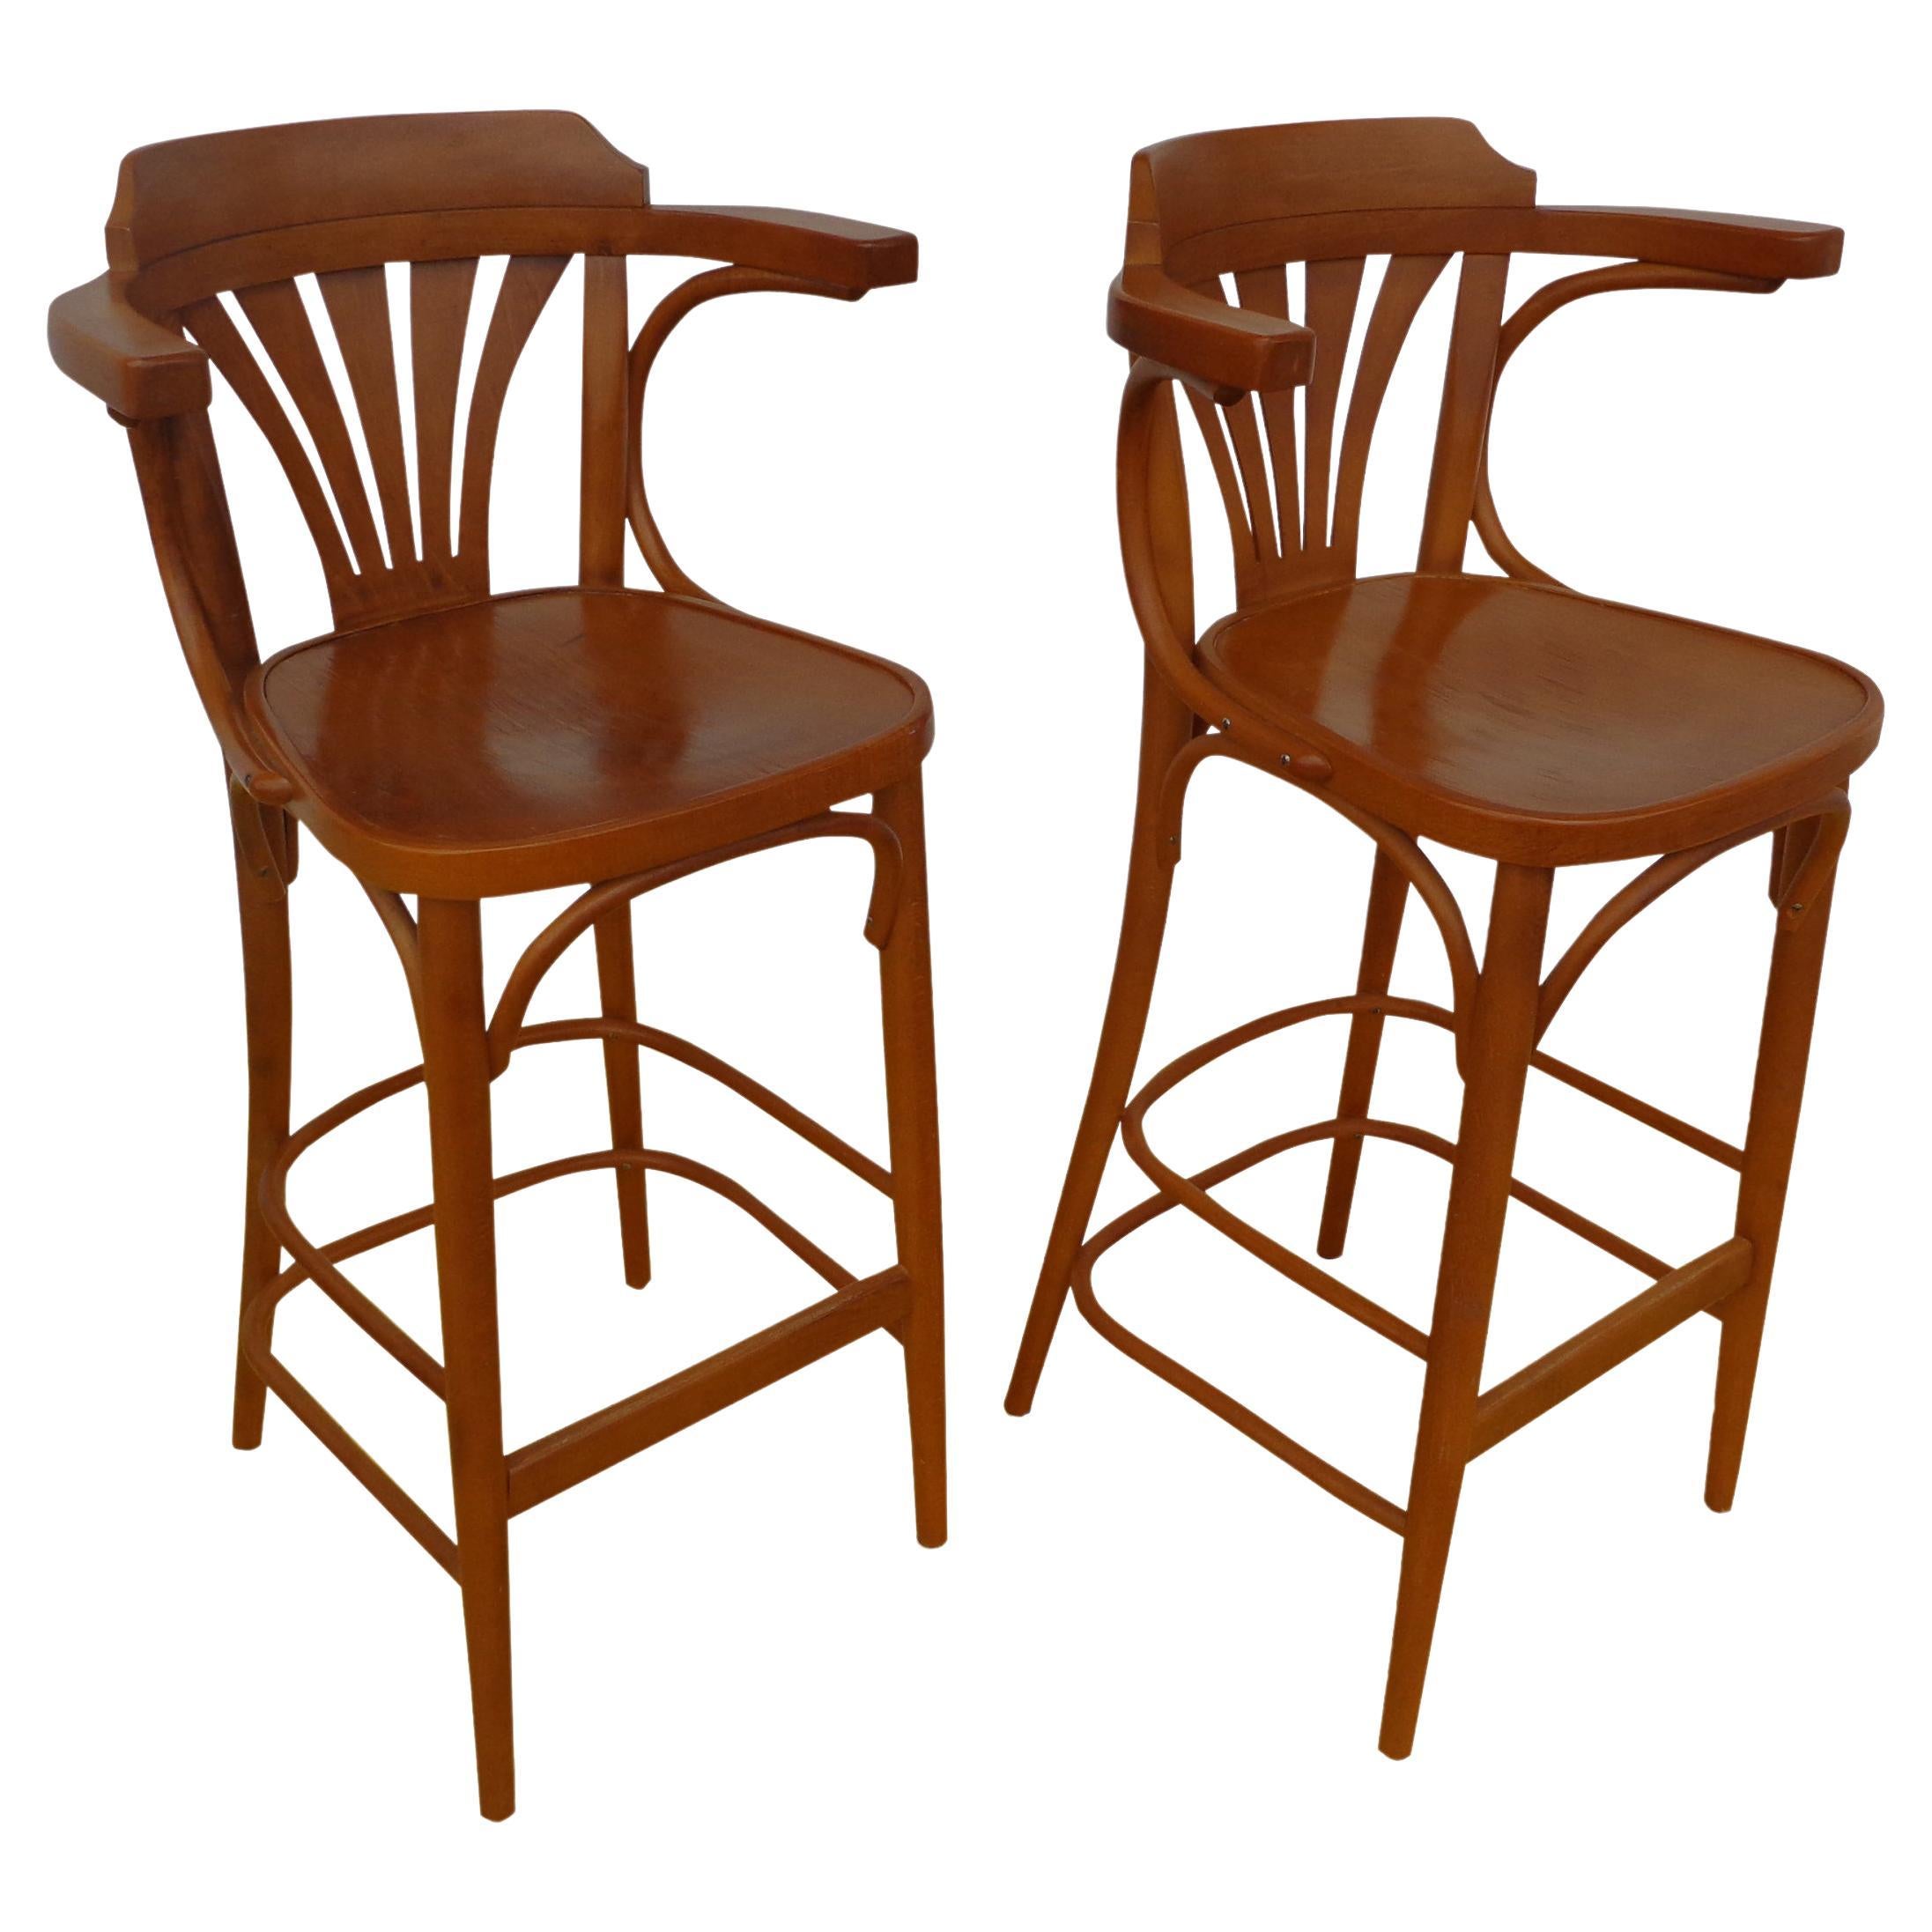 Pair Thonet style bar stools

Thonet style barstools manufactured in the Czech republic.
Sculptural bentwood frames in a dark walnut finish. Marked/Engraved “Made in Czechoslowakia” 


Measures: Seat height 28.5.